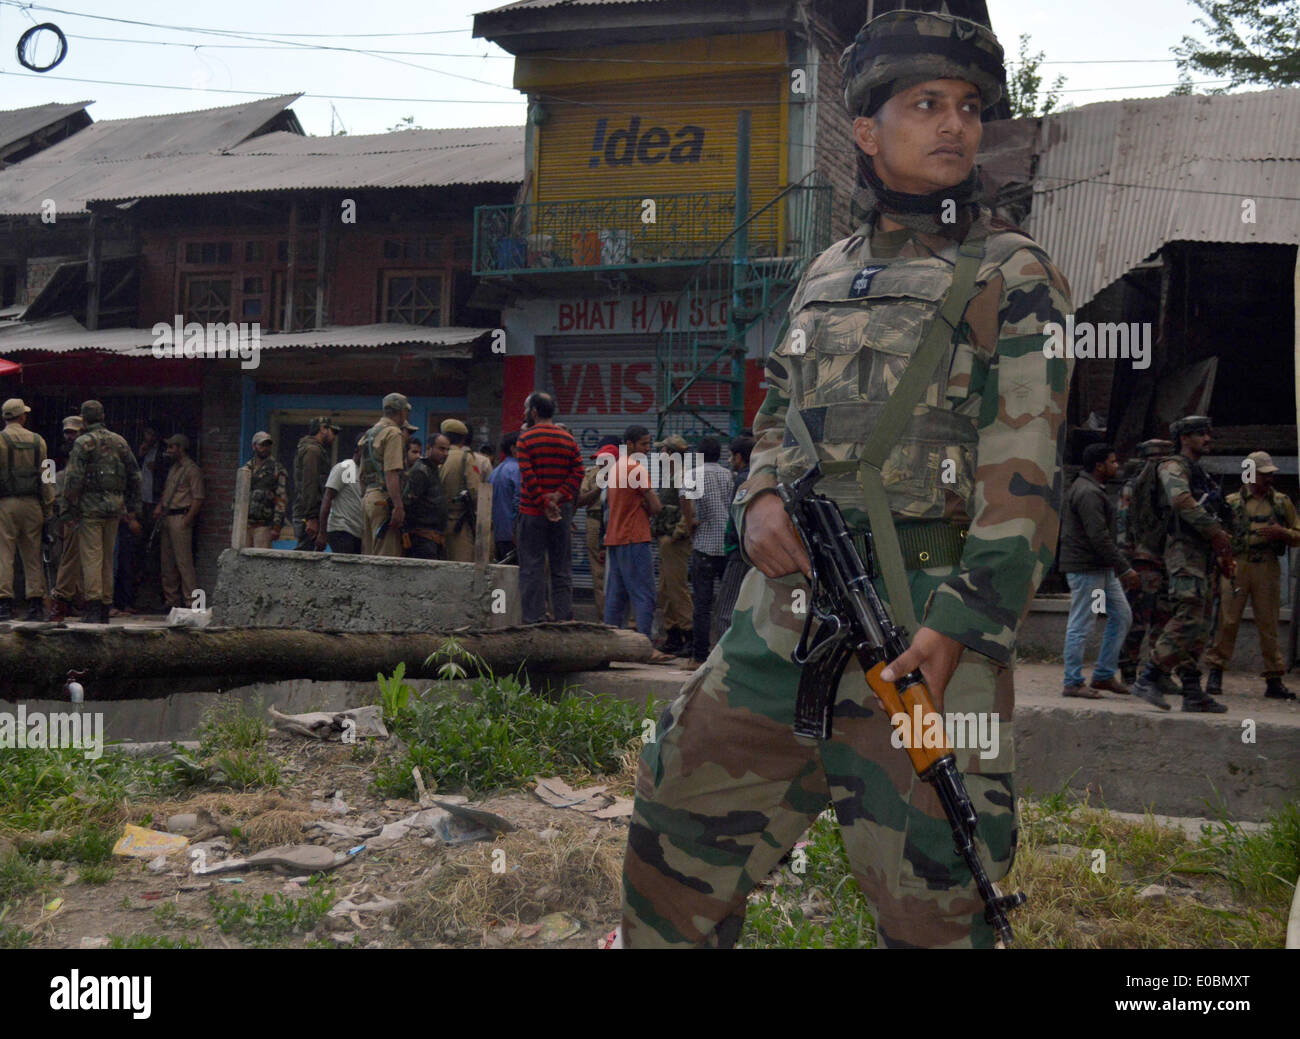 Srinagar, Indian Administered Kashmir. 08  May 2014  : I ndian army personnels cordon off the area after  Ghulam Mohammad Bhat of  ruling national conference this evening   a panchayat member shot dead  by un identified millitants  at wanpoh kulgam district   Credit:  Sofi Suhail/Alamy Live News ) Stock Photo